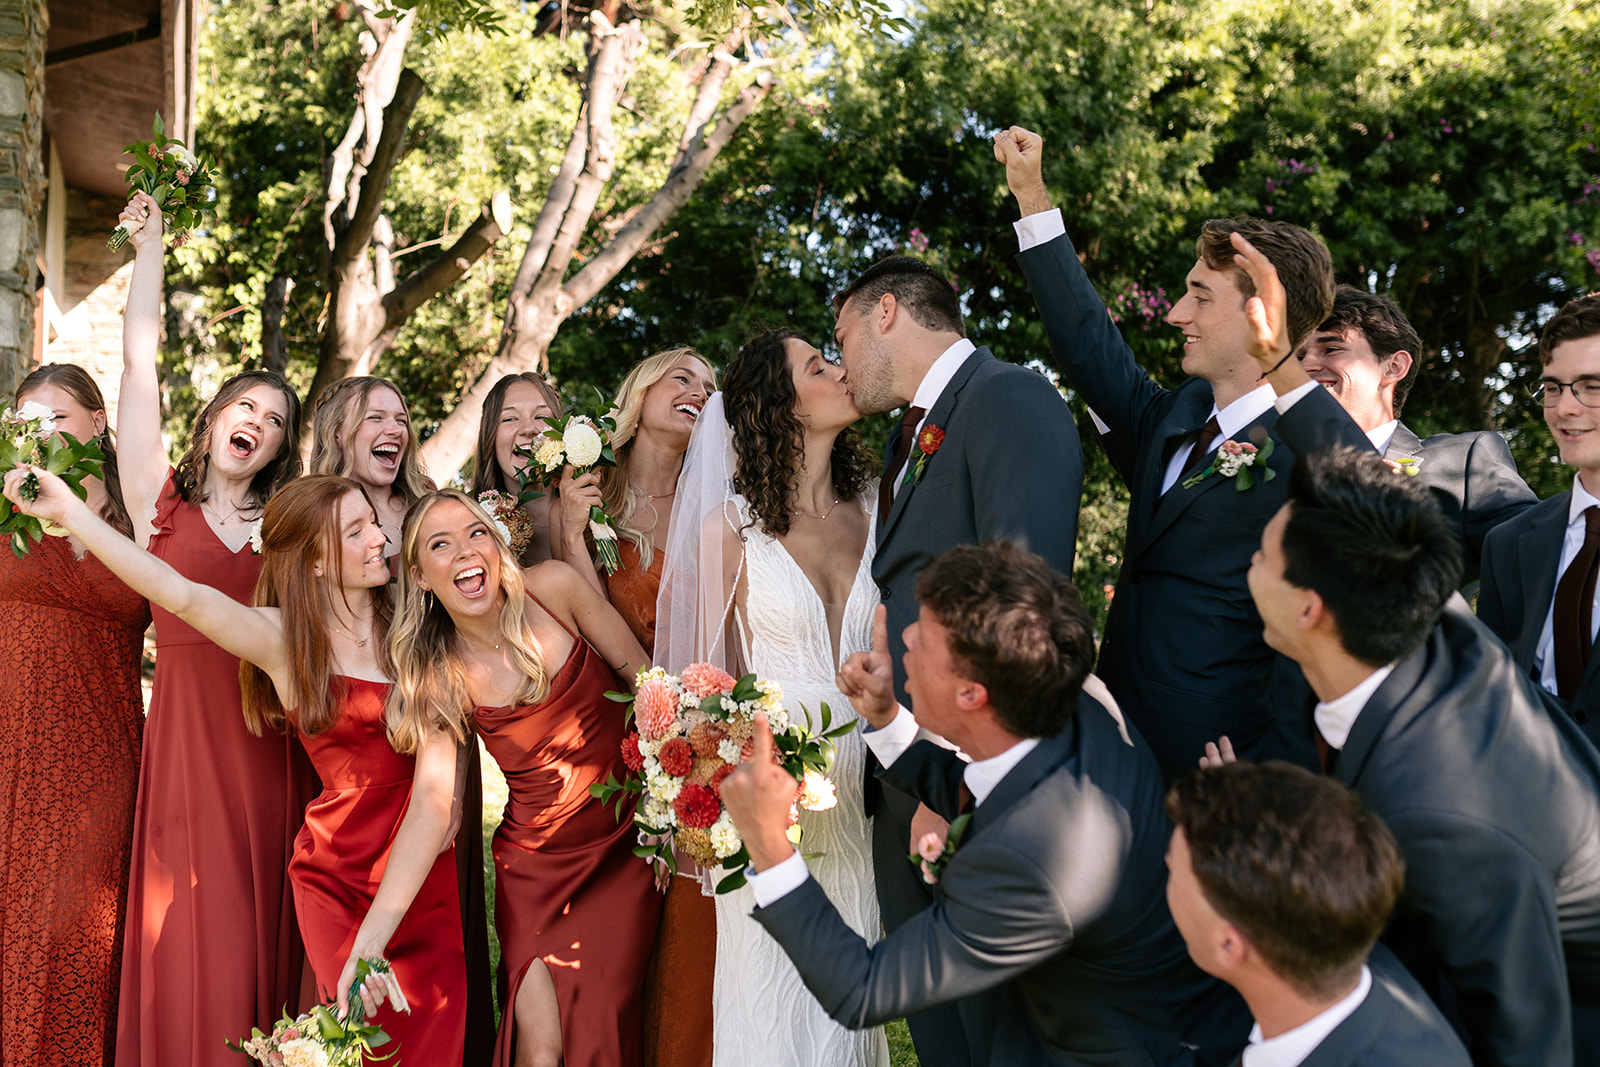 griffith house anaheim california socal orange county wedding bridesmaids groomsmen pictures rmismatched dresses